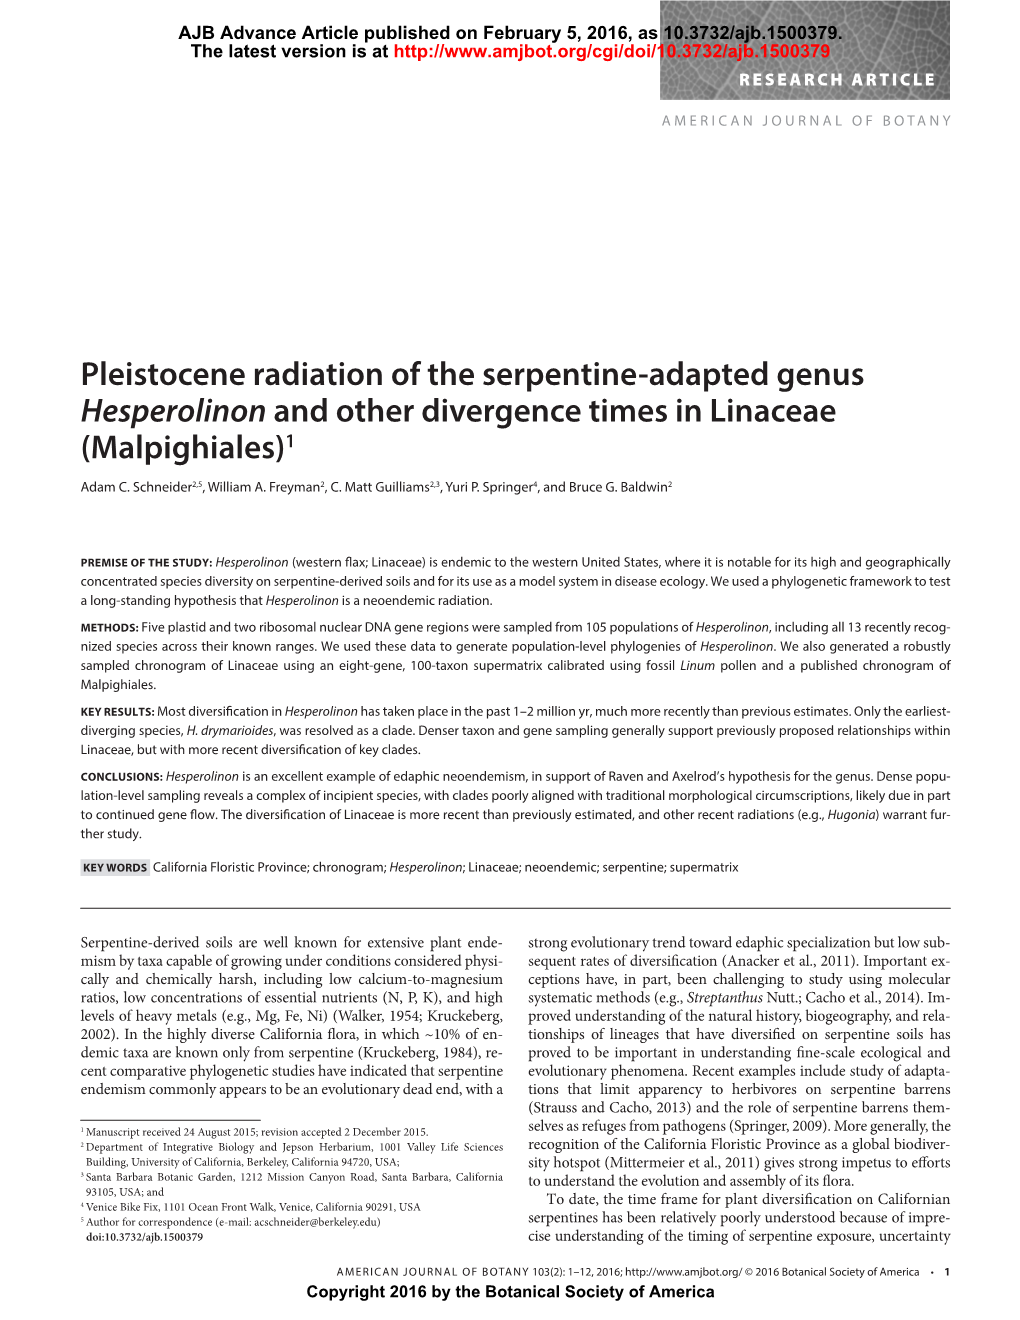 Pleistocene Radiation of the Serpentine-Adapted Genus Hesperolinon and Other Divergence Times in Linaceae (Malpighiales)1